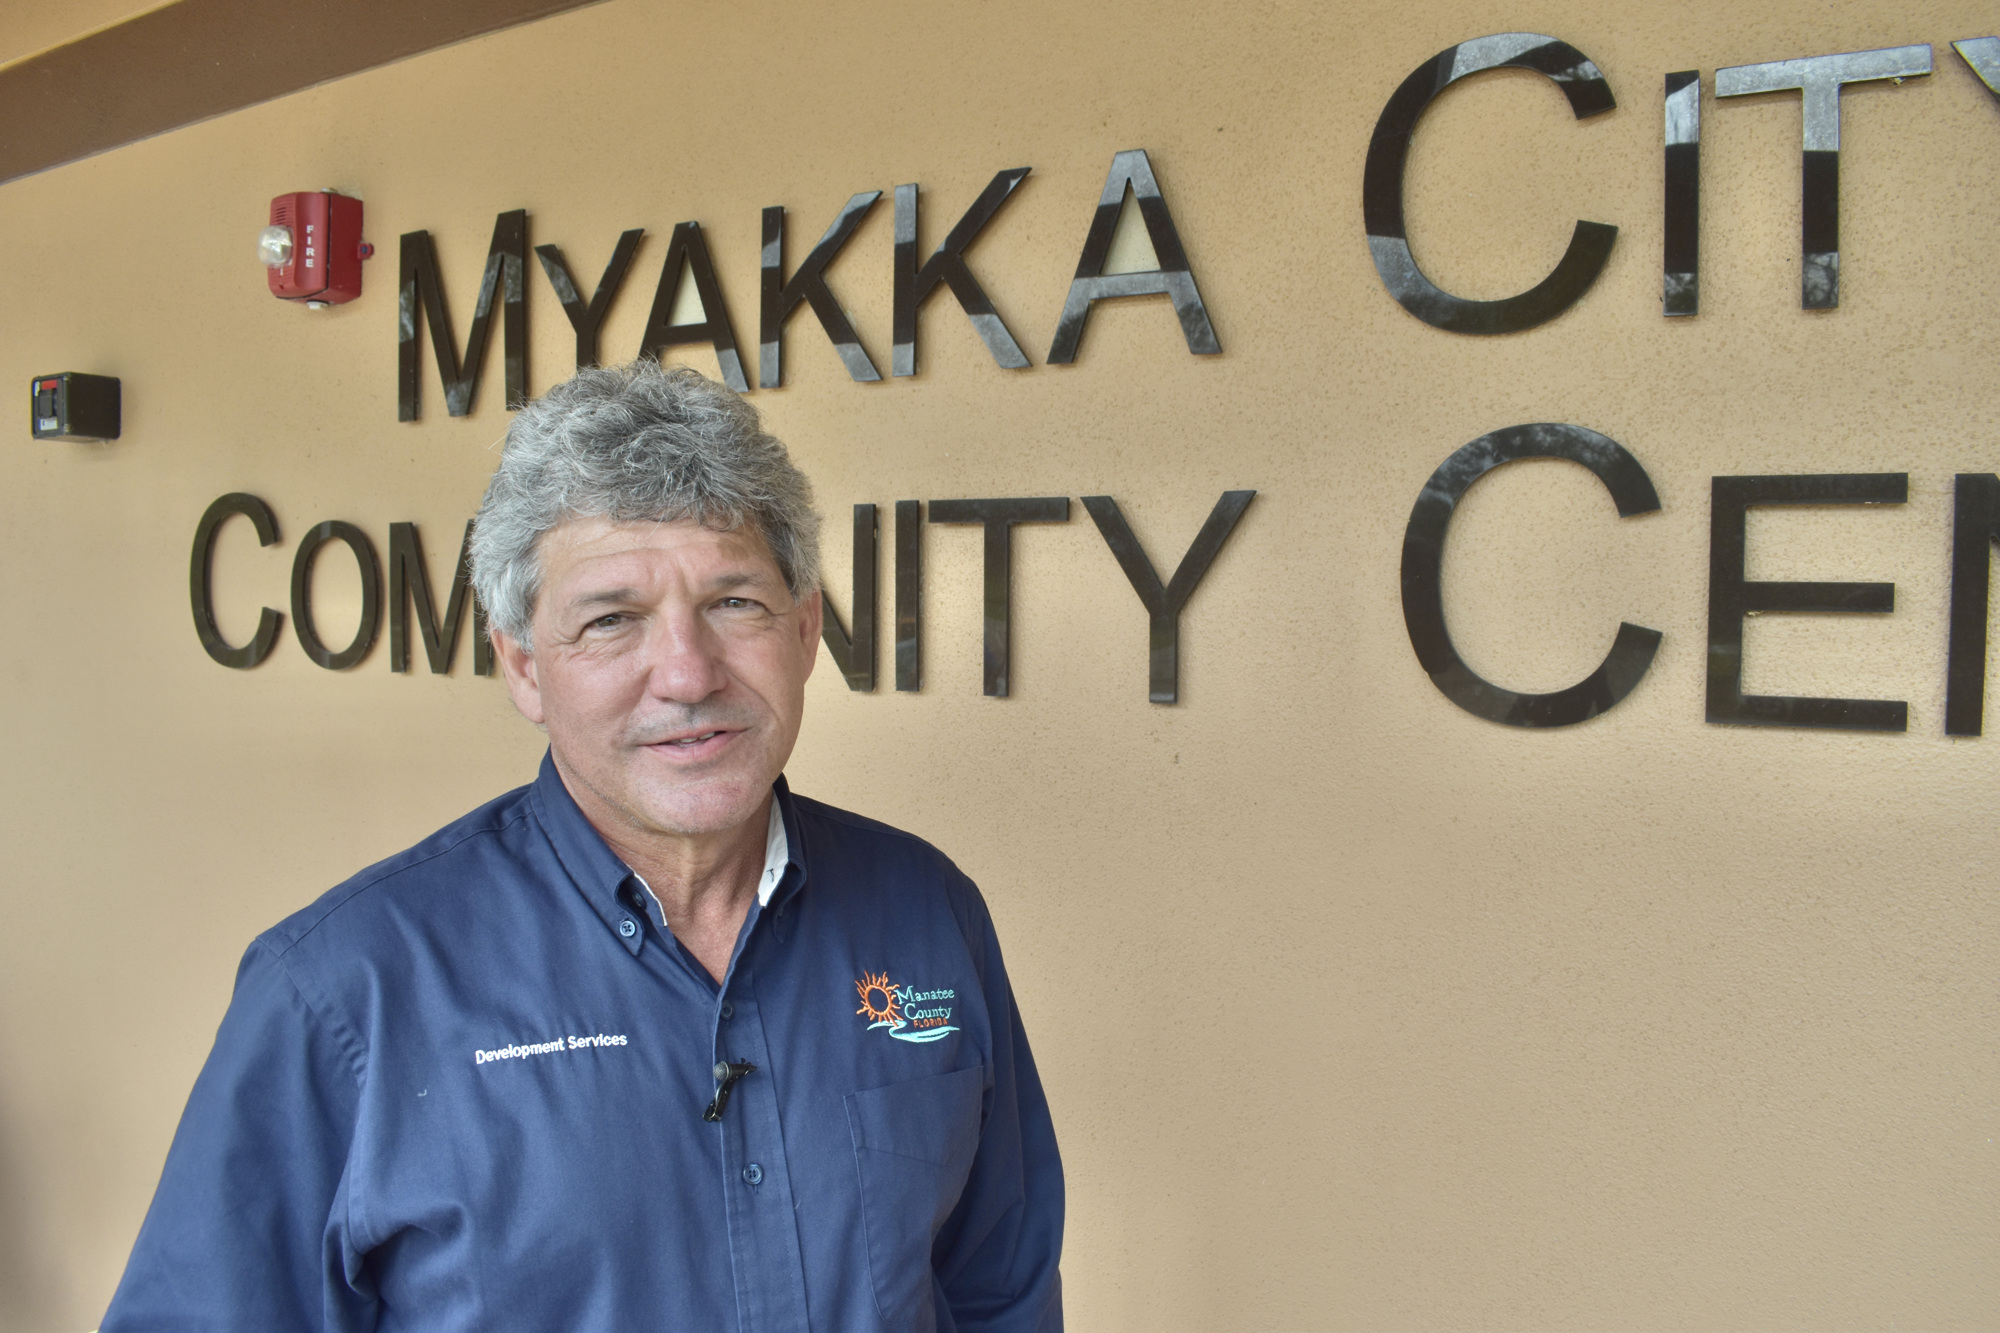 County Administrator Scott Hopes visited the Myakka City Community Center as emergency supplies were being distributed.